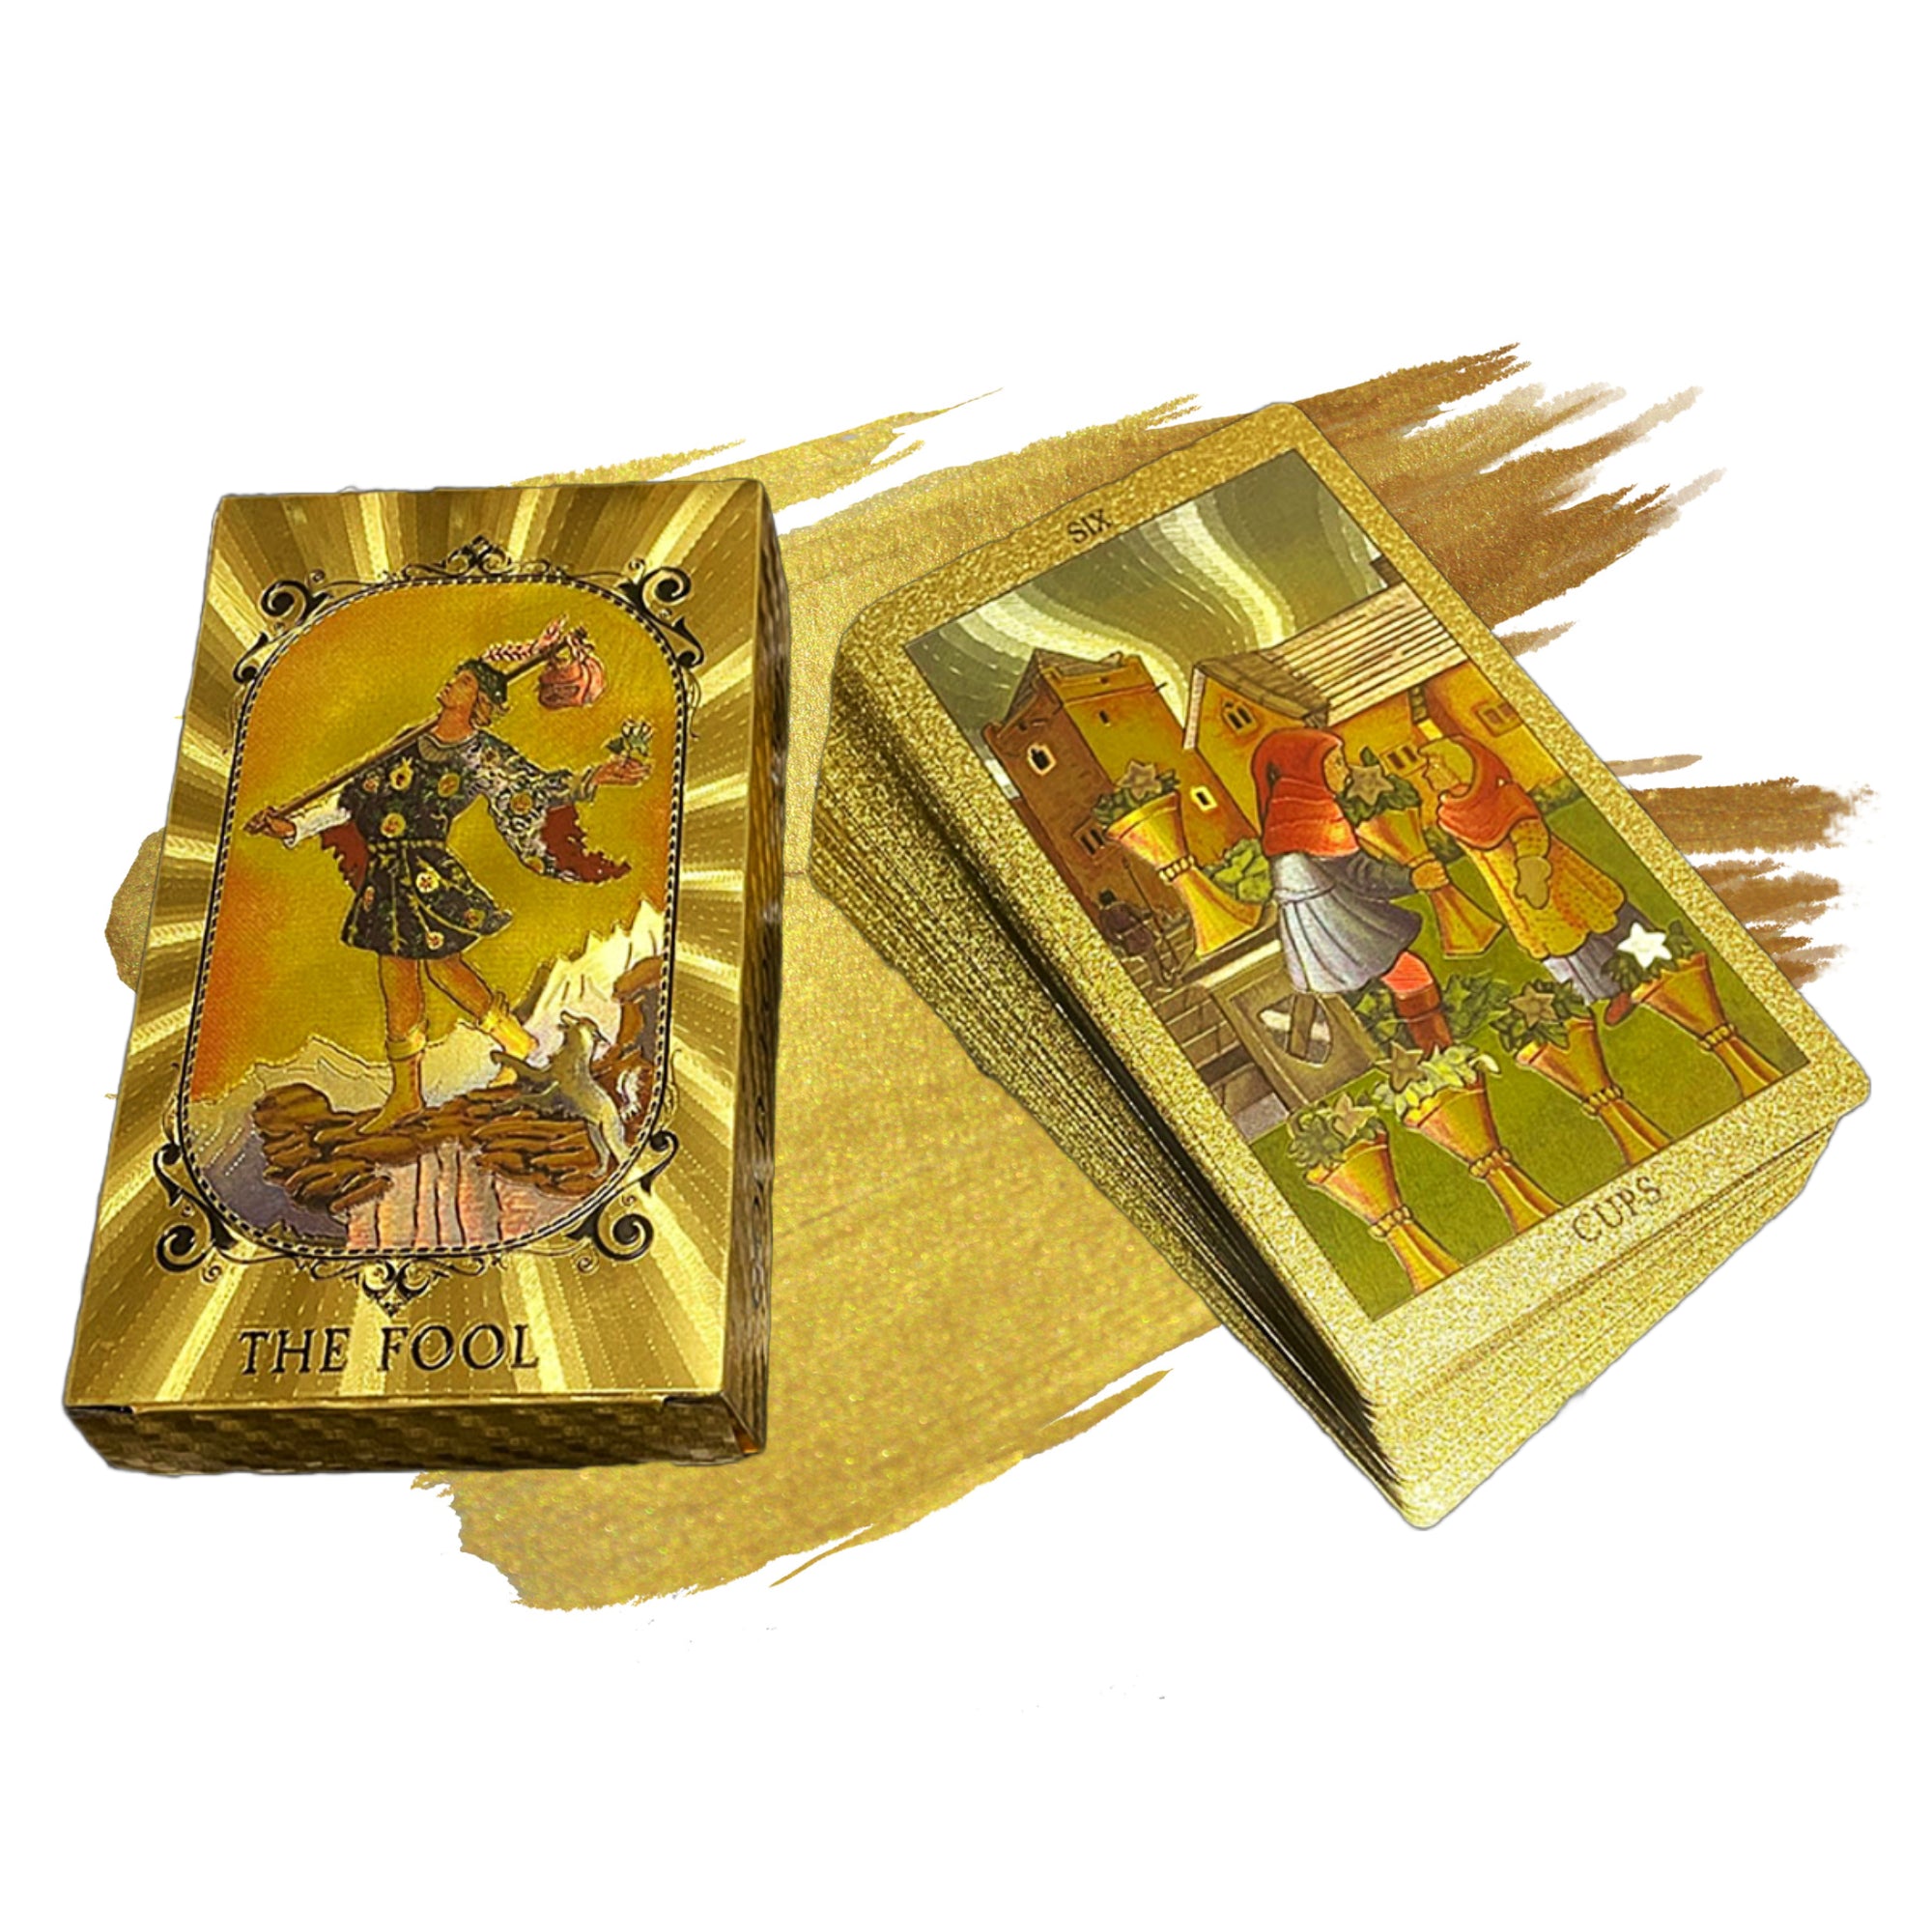 Gold Foil Tarot Cards Deck In Economic Tuck Box With Colored English Guidebook For Beginners | RWS-Inspired Premium Plastic Card Divination Gift Set | Apollo Tarot Shop